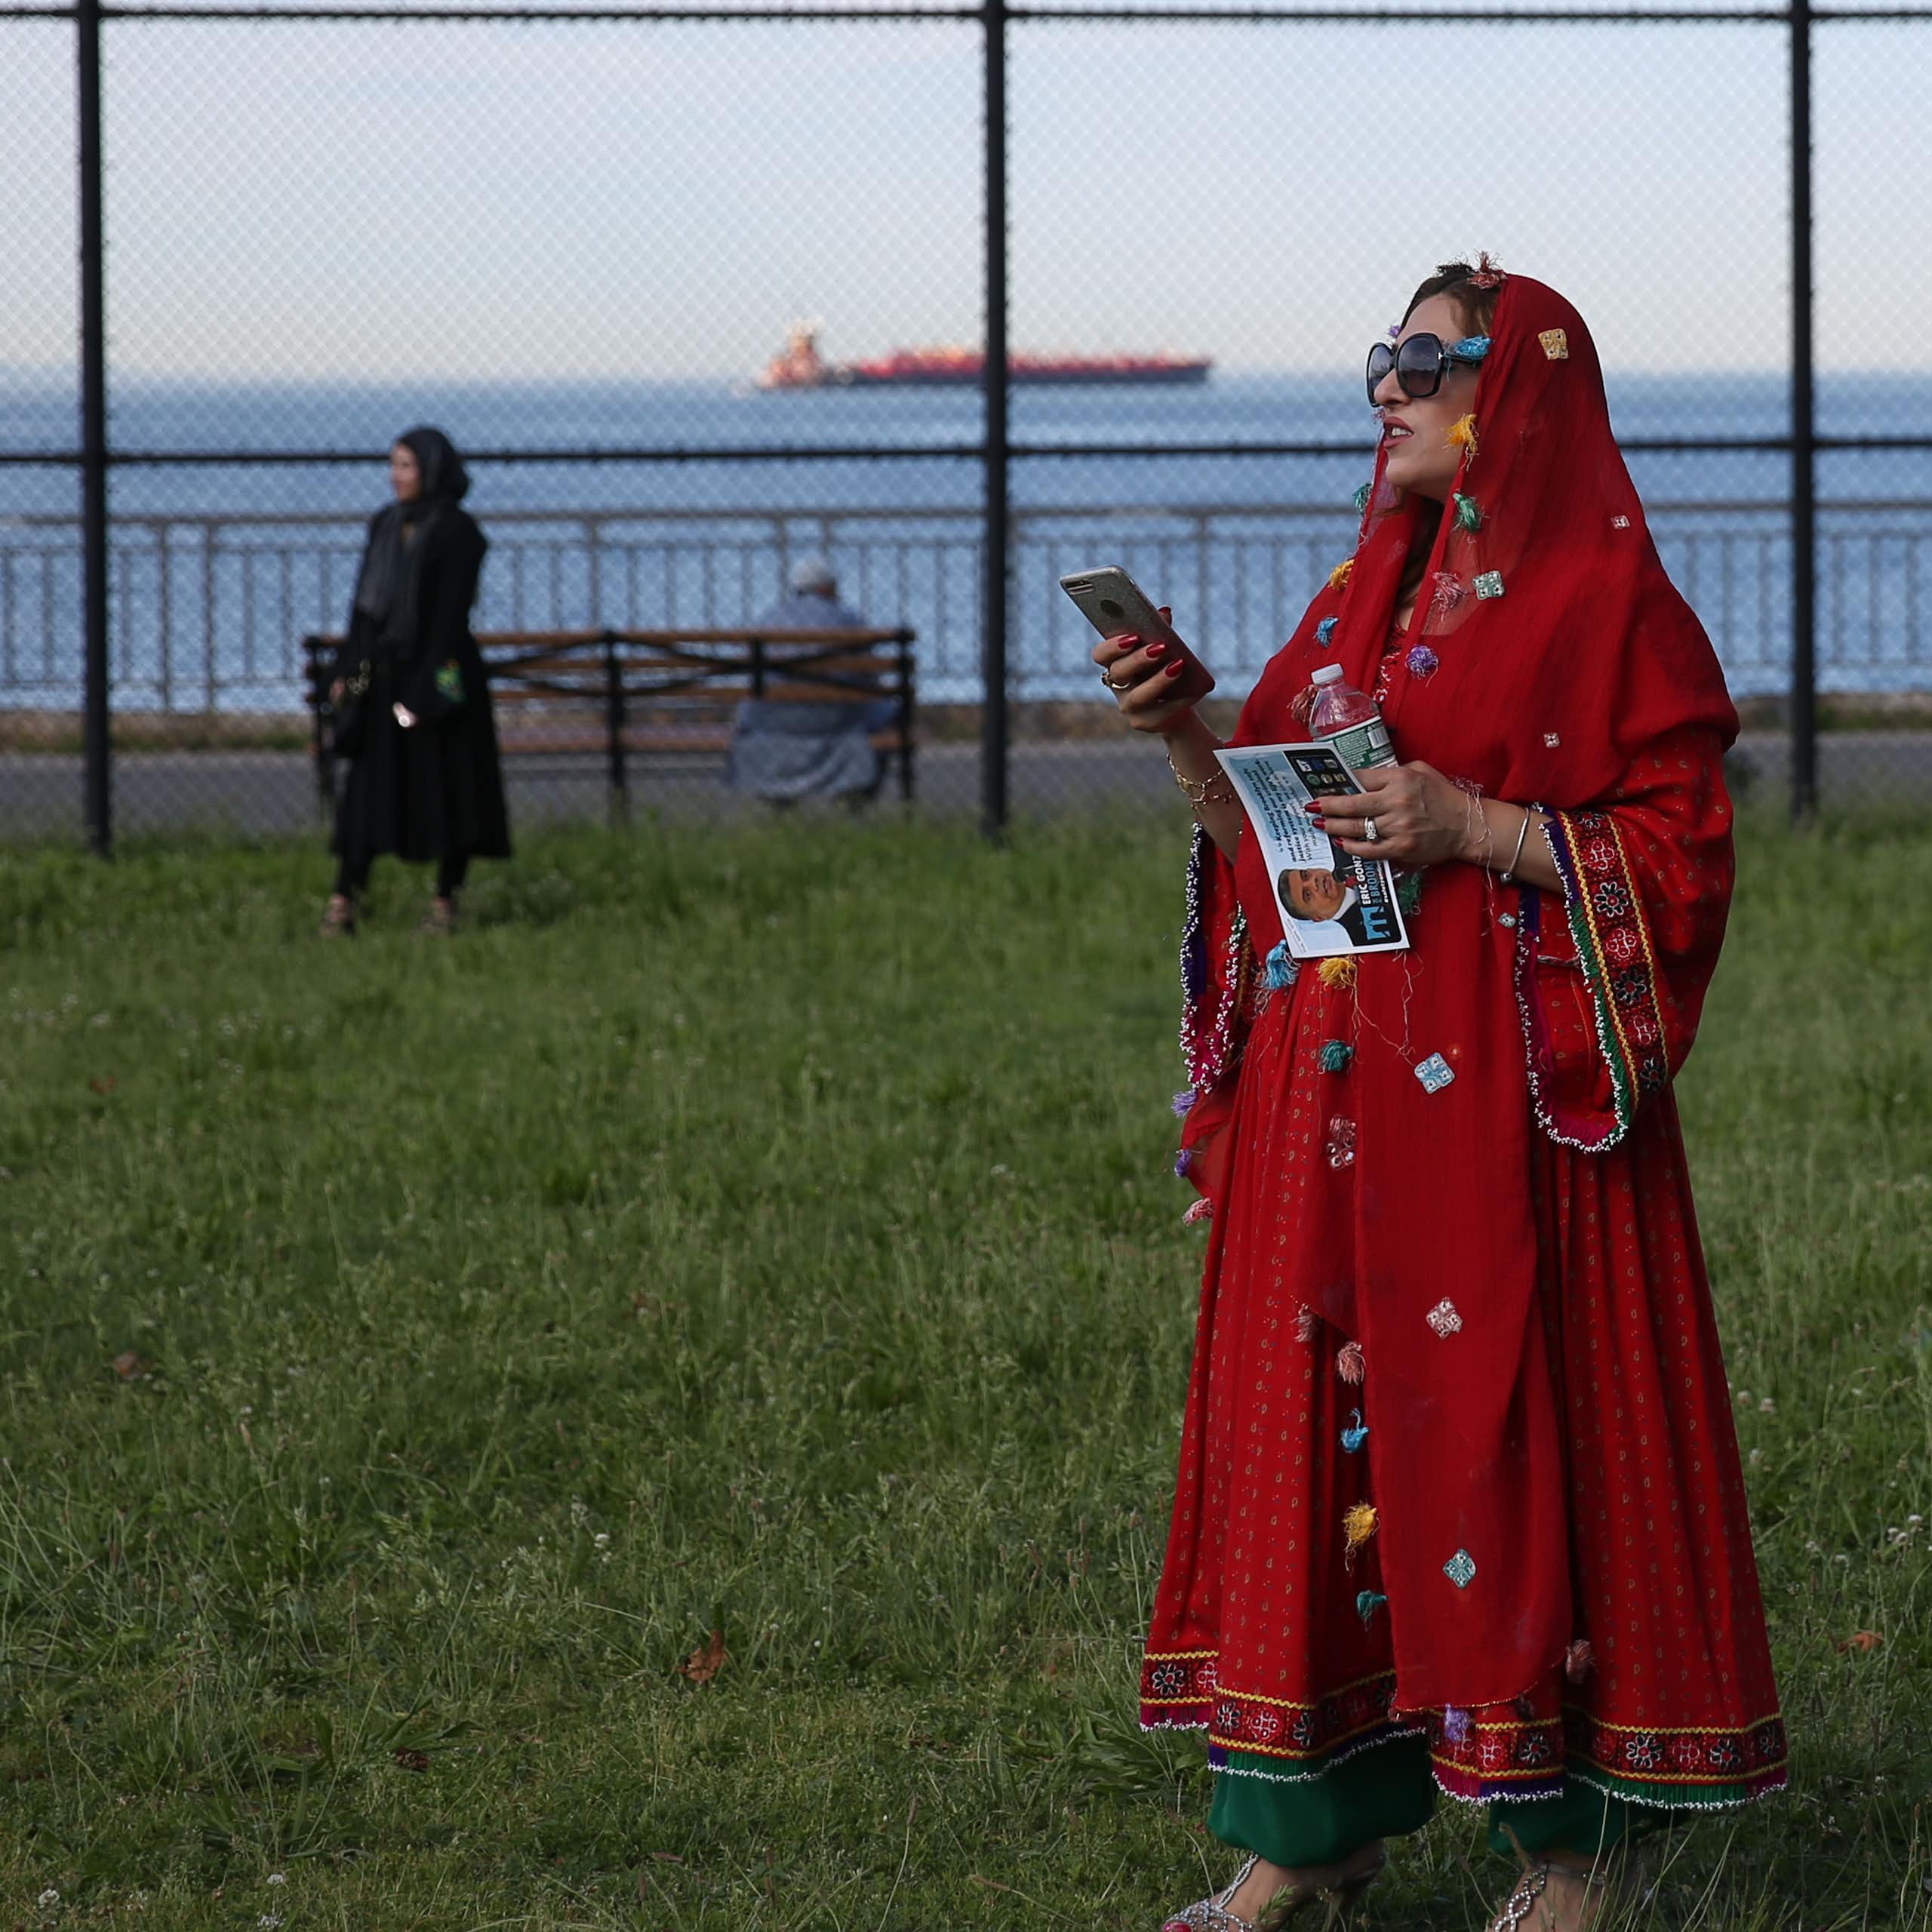 Muslim woman stands in a park holding a cel phone and looking off into the distance.